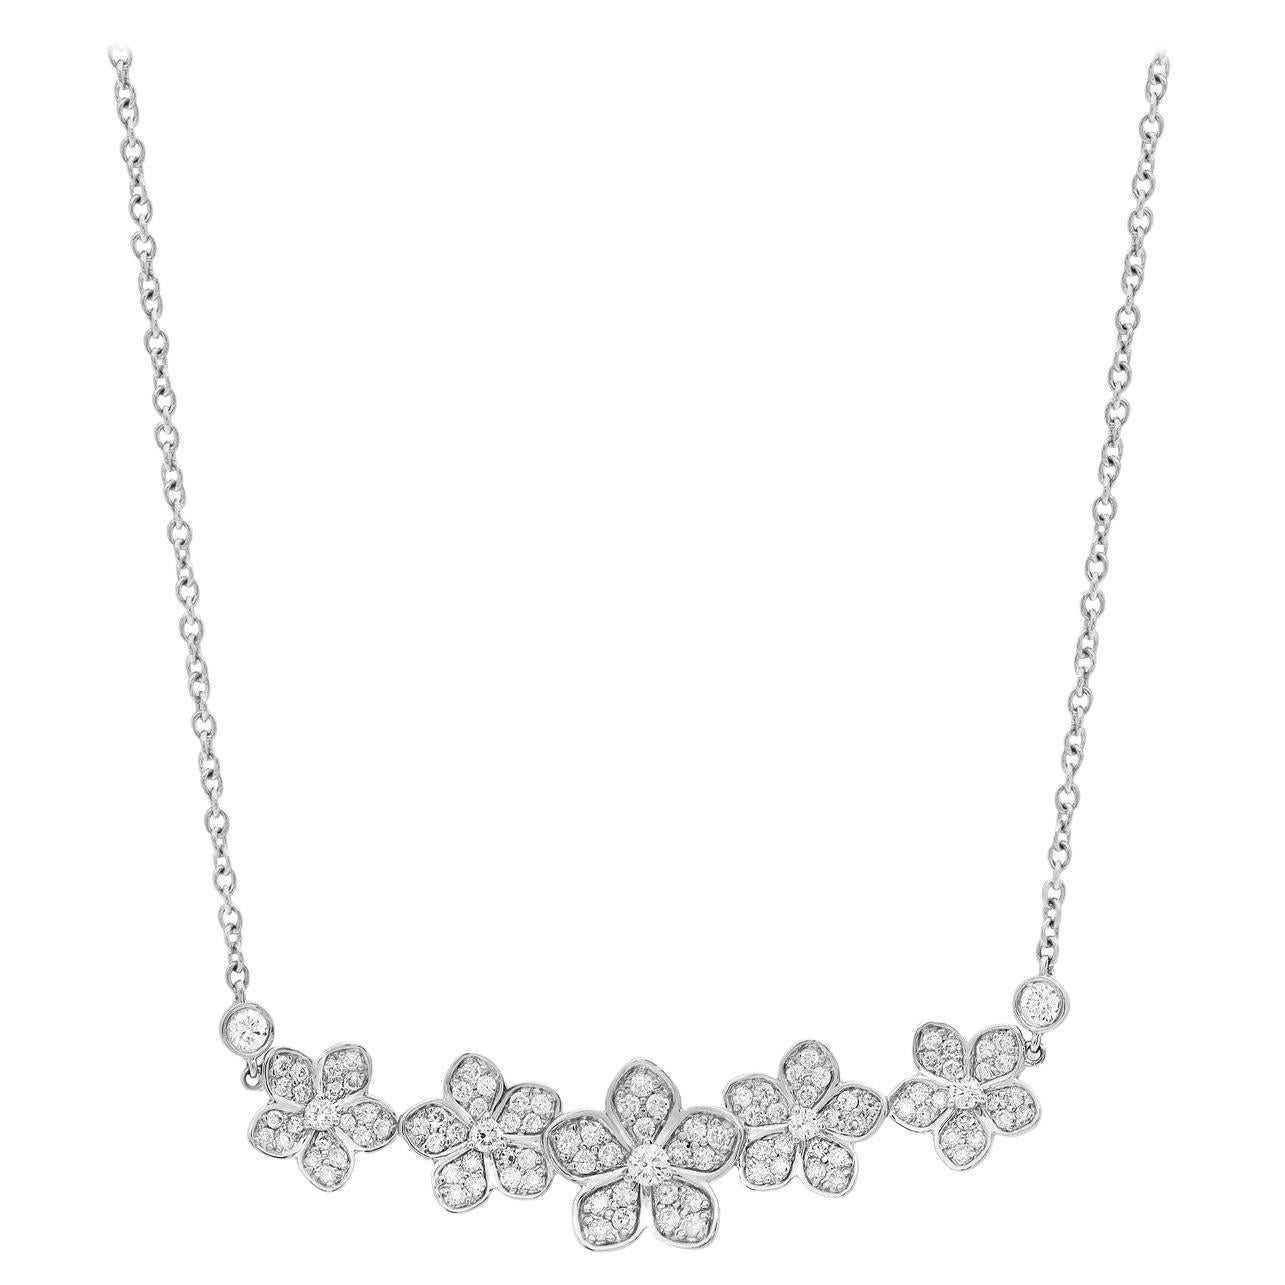 0.87 Carat Diamond Bar Pendant Necklace in 18K White Gold For Sale